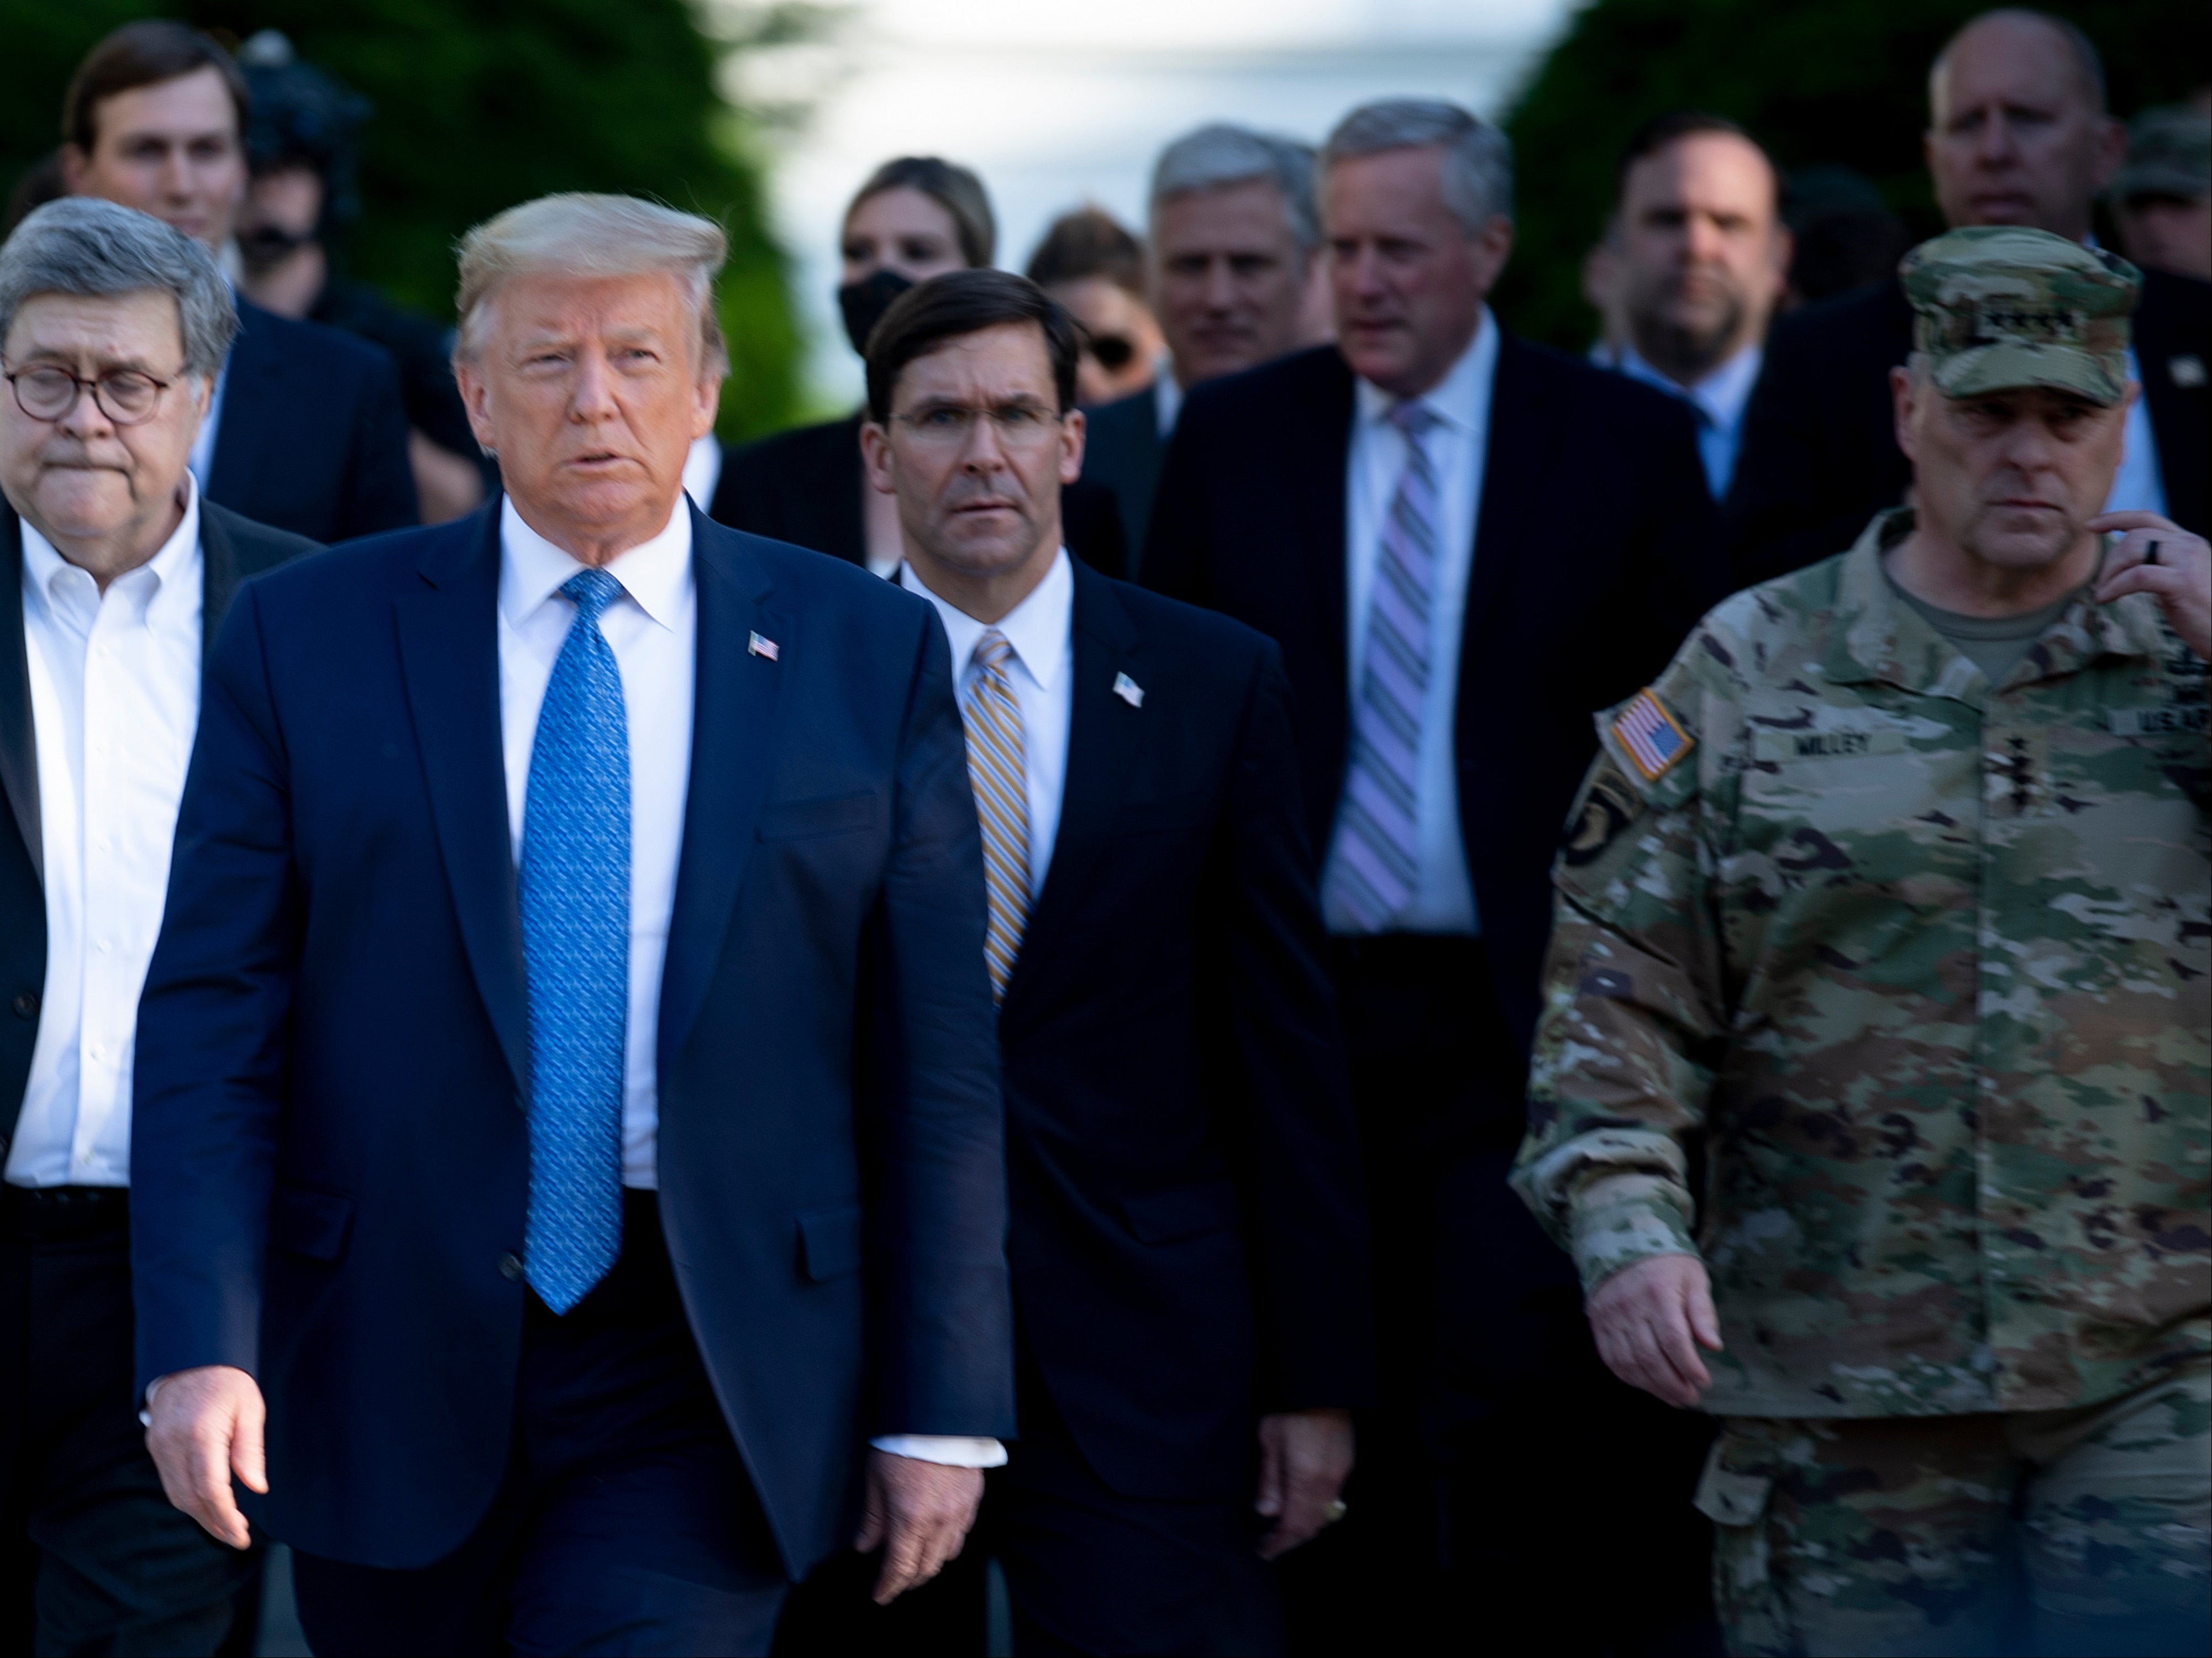 Donald Trump walks with Chairman of the Joint Chiefs of Staff Mark Milley and others to visit St John’s Church on June 1, 2020, in Washington, DC.